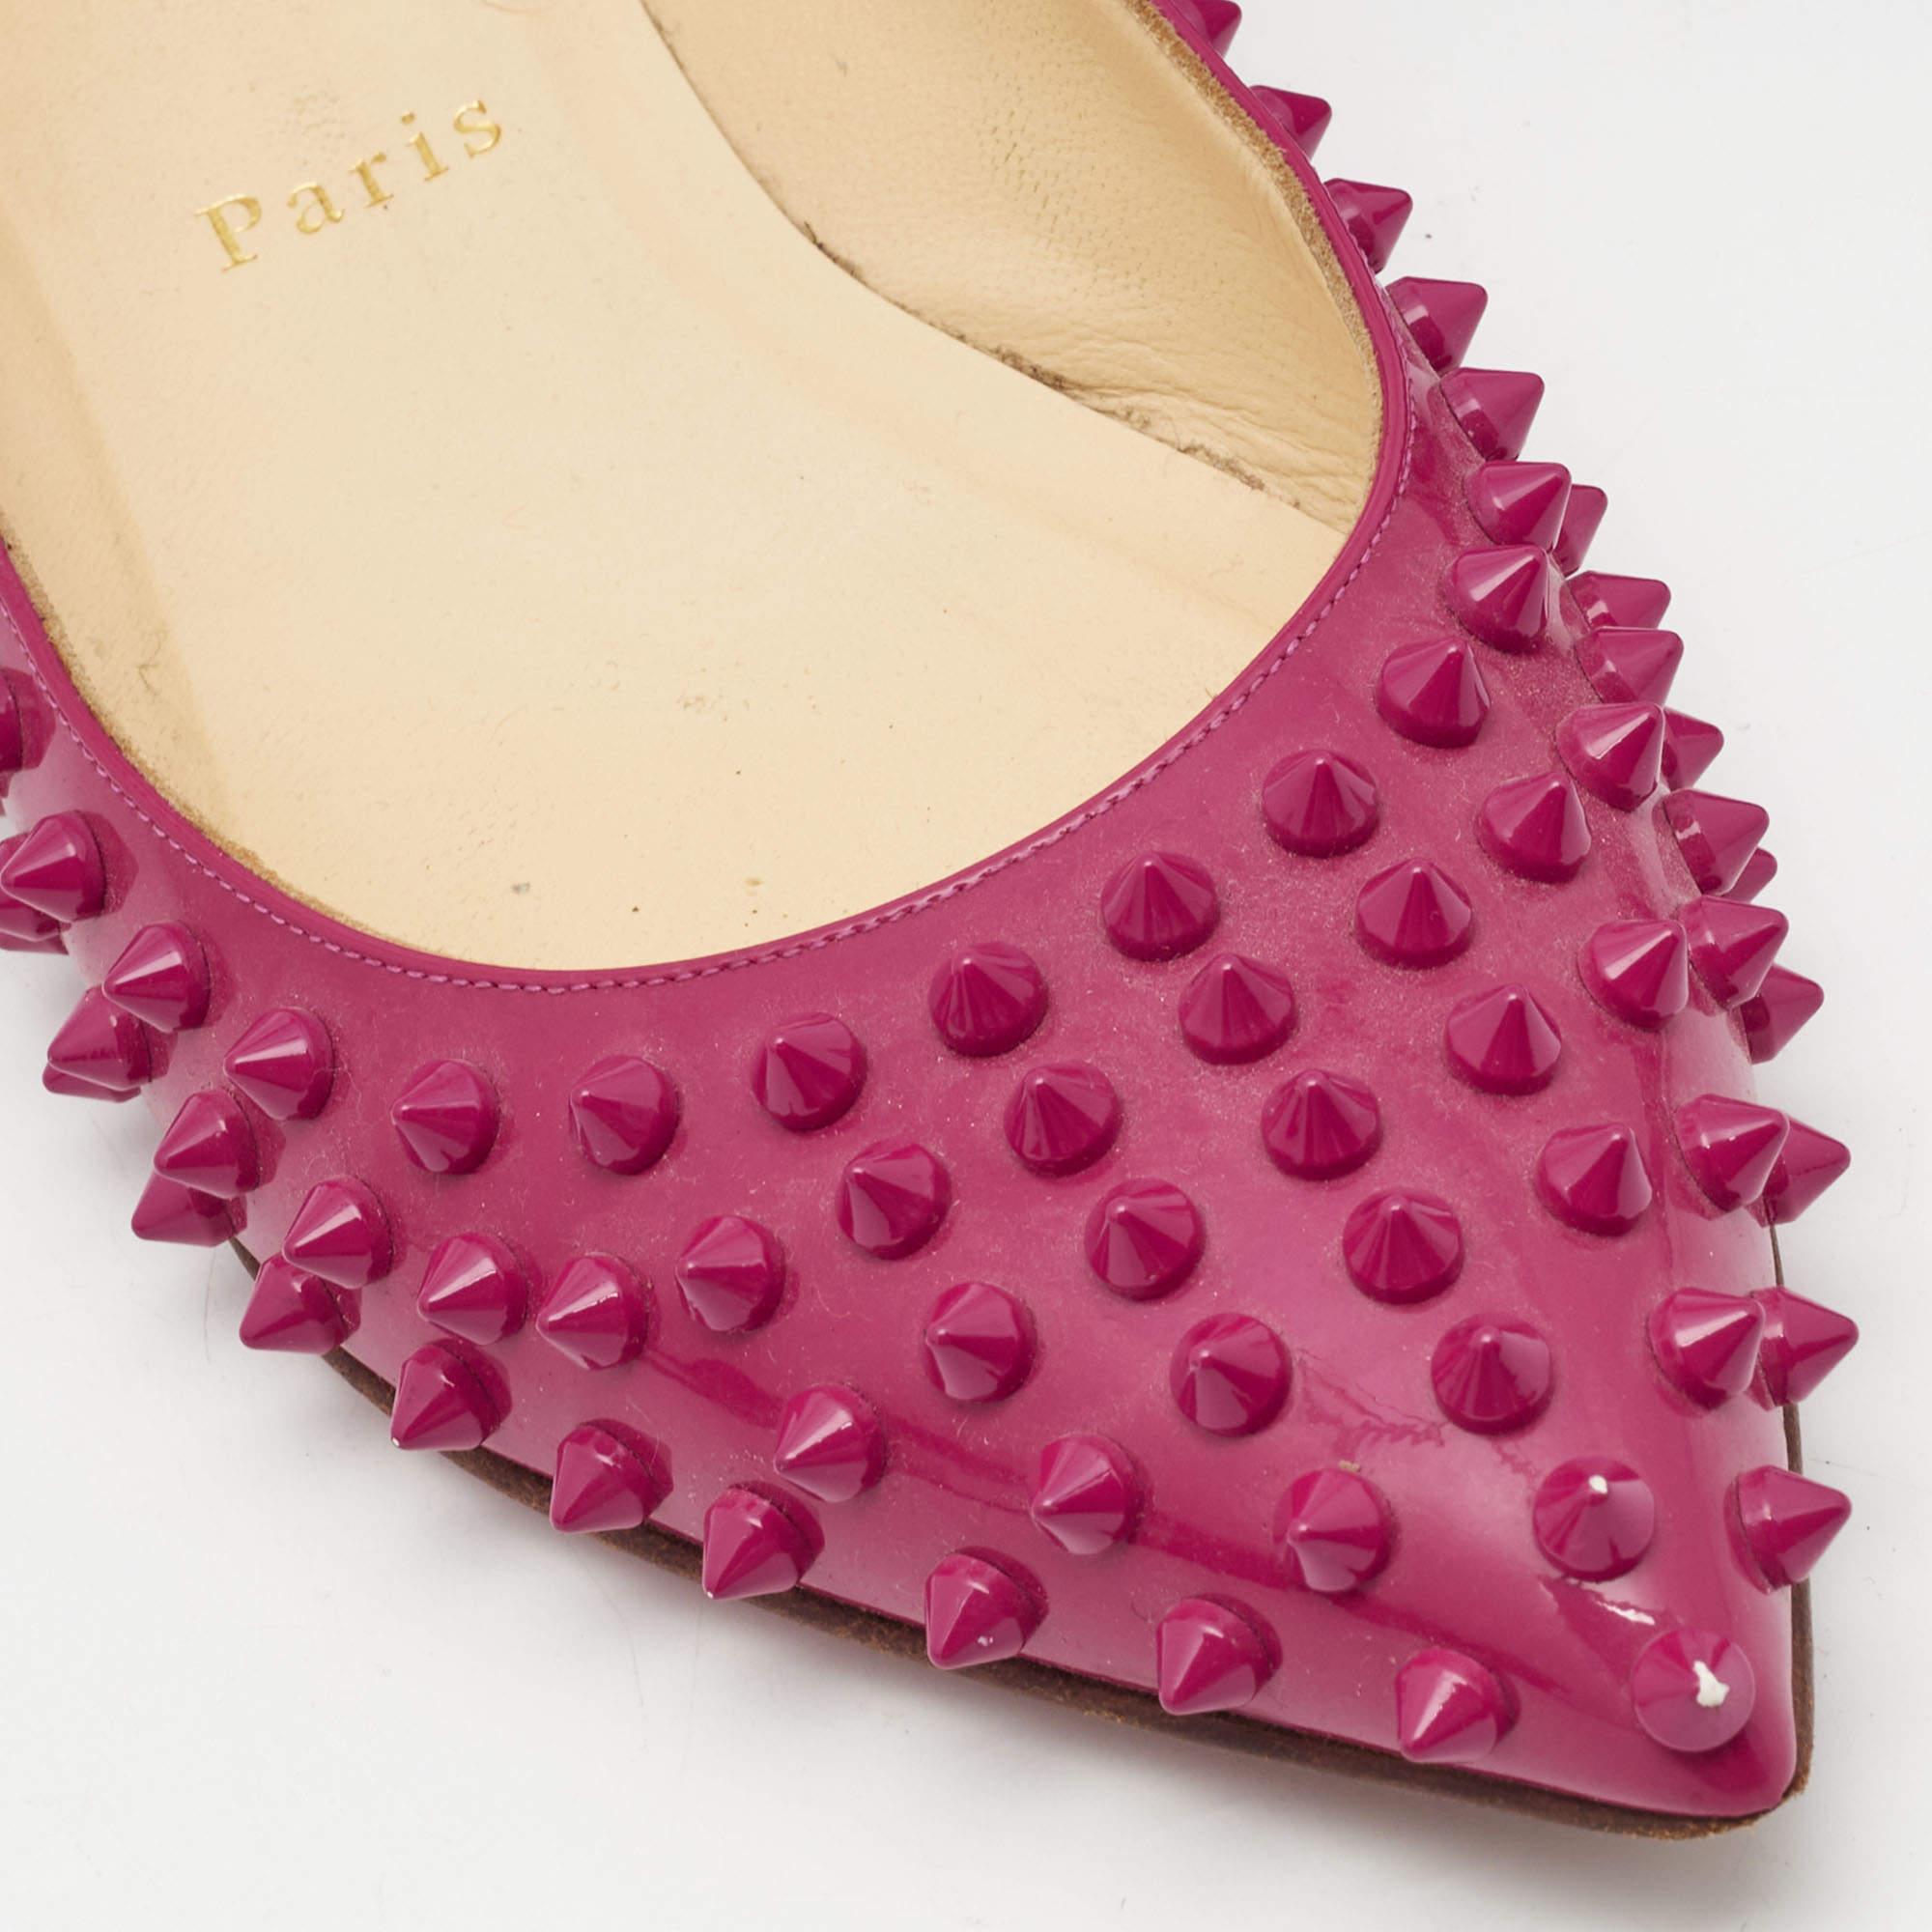 Christian Louboutin Pink Patent Leather Pigalle Spikes Ballet Flats Size 39 2